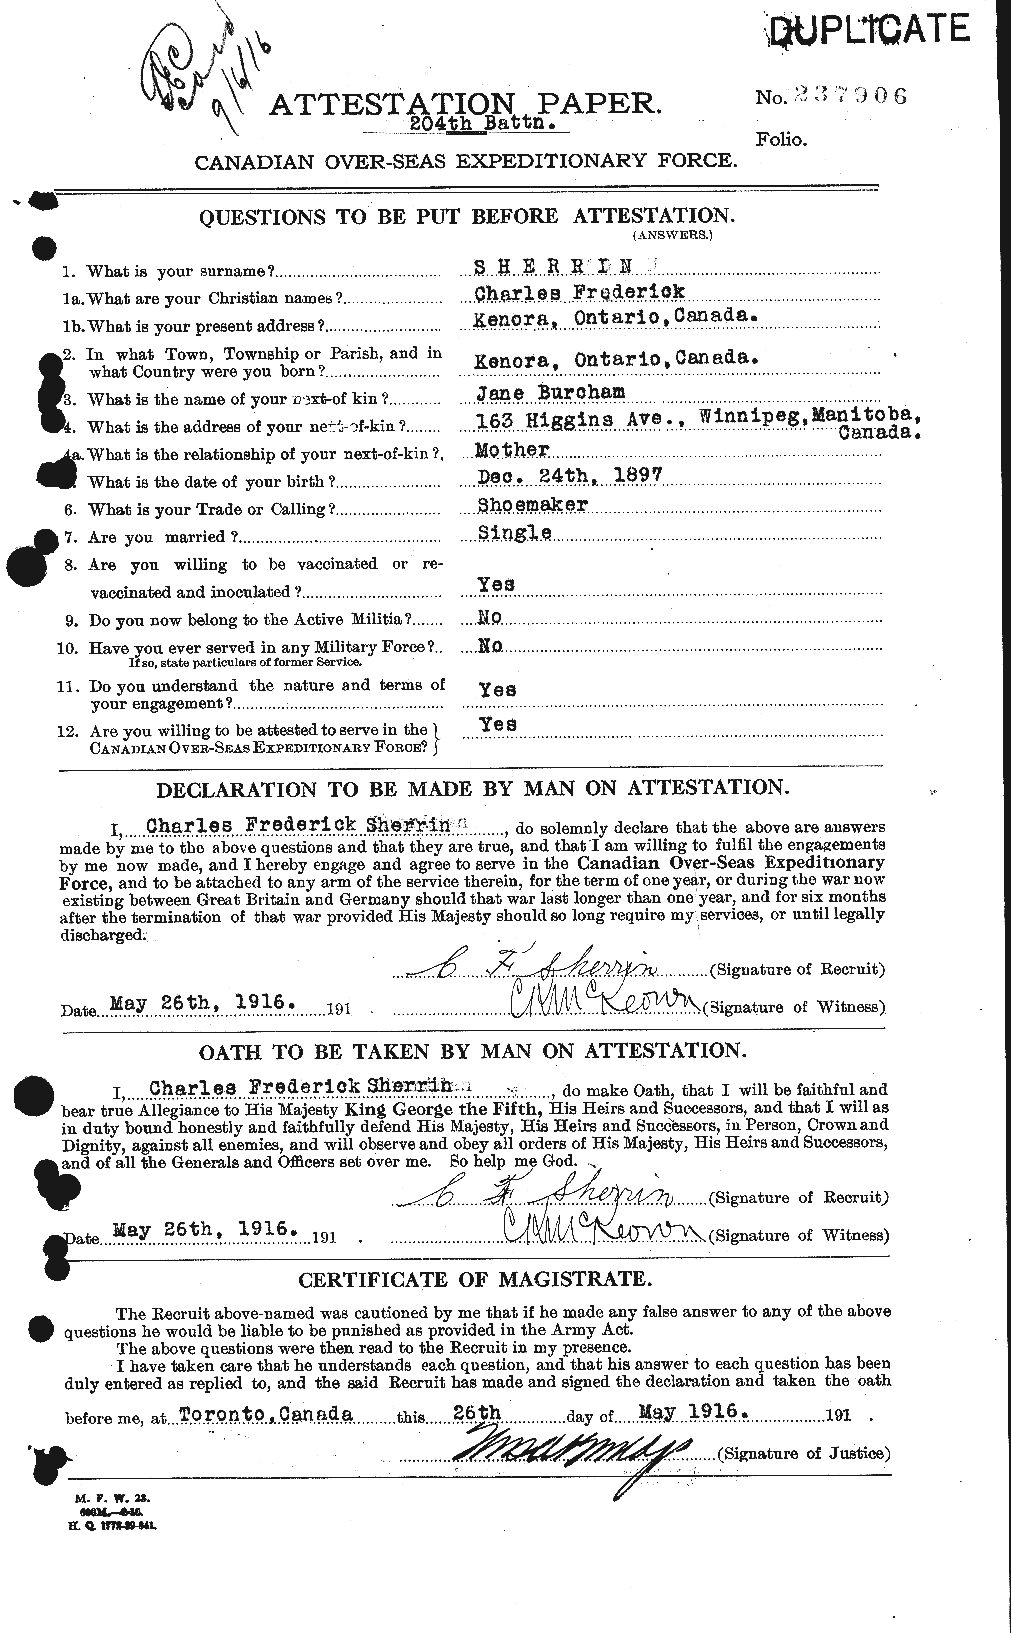 Personnel Records of the First World War - CEF 092381a